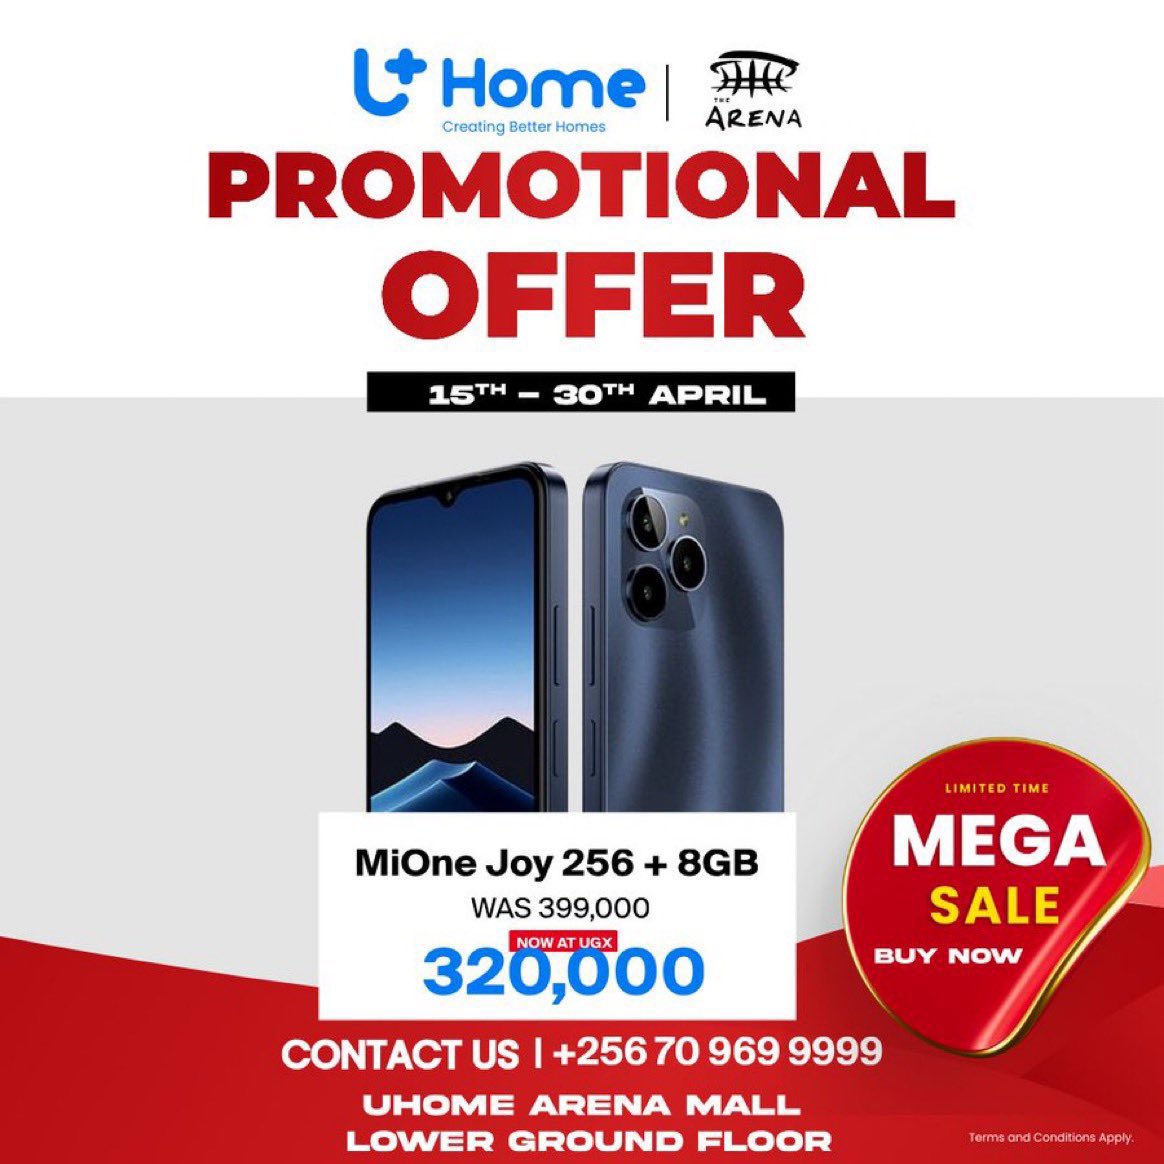 Get this MiOne Joy smartphone at only Ugx. 320,000. Offer valid until the 30th of April. Visit @UhomeUganda at Arena Mall. #UhomeDiscounts | #UhomeArenaMall